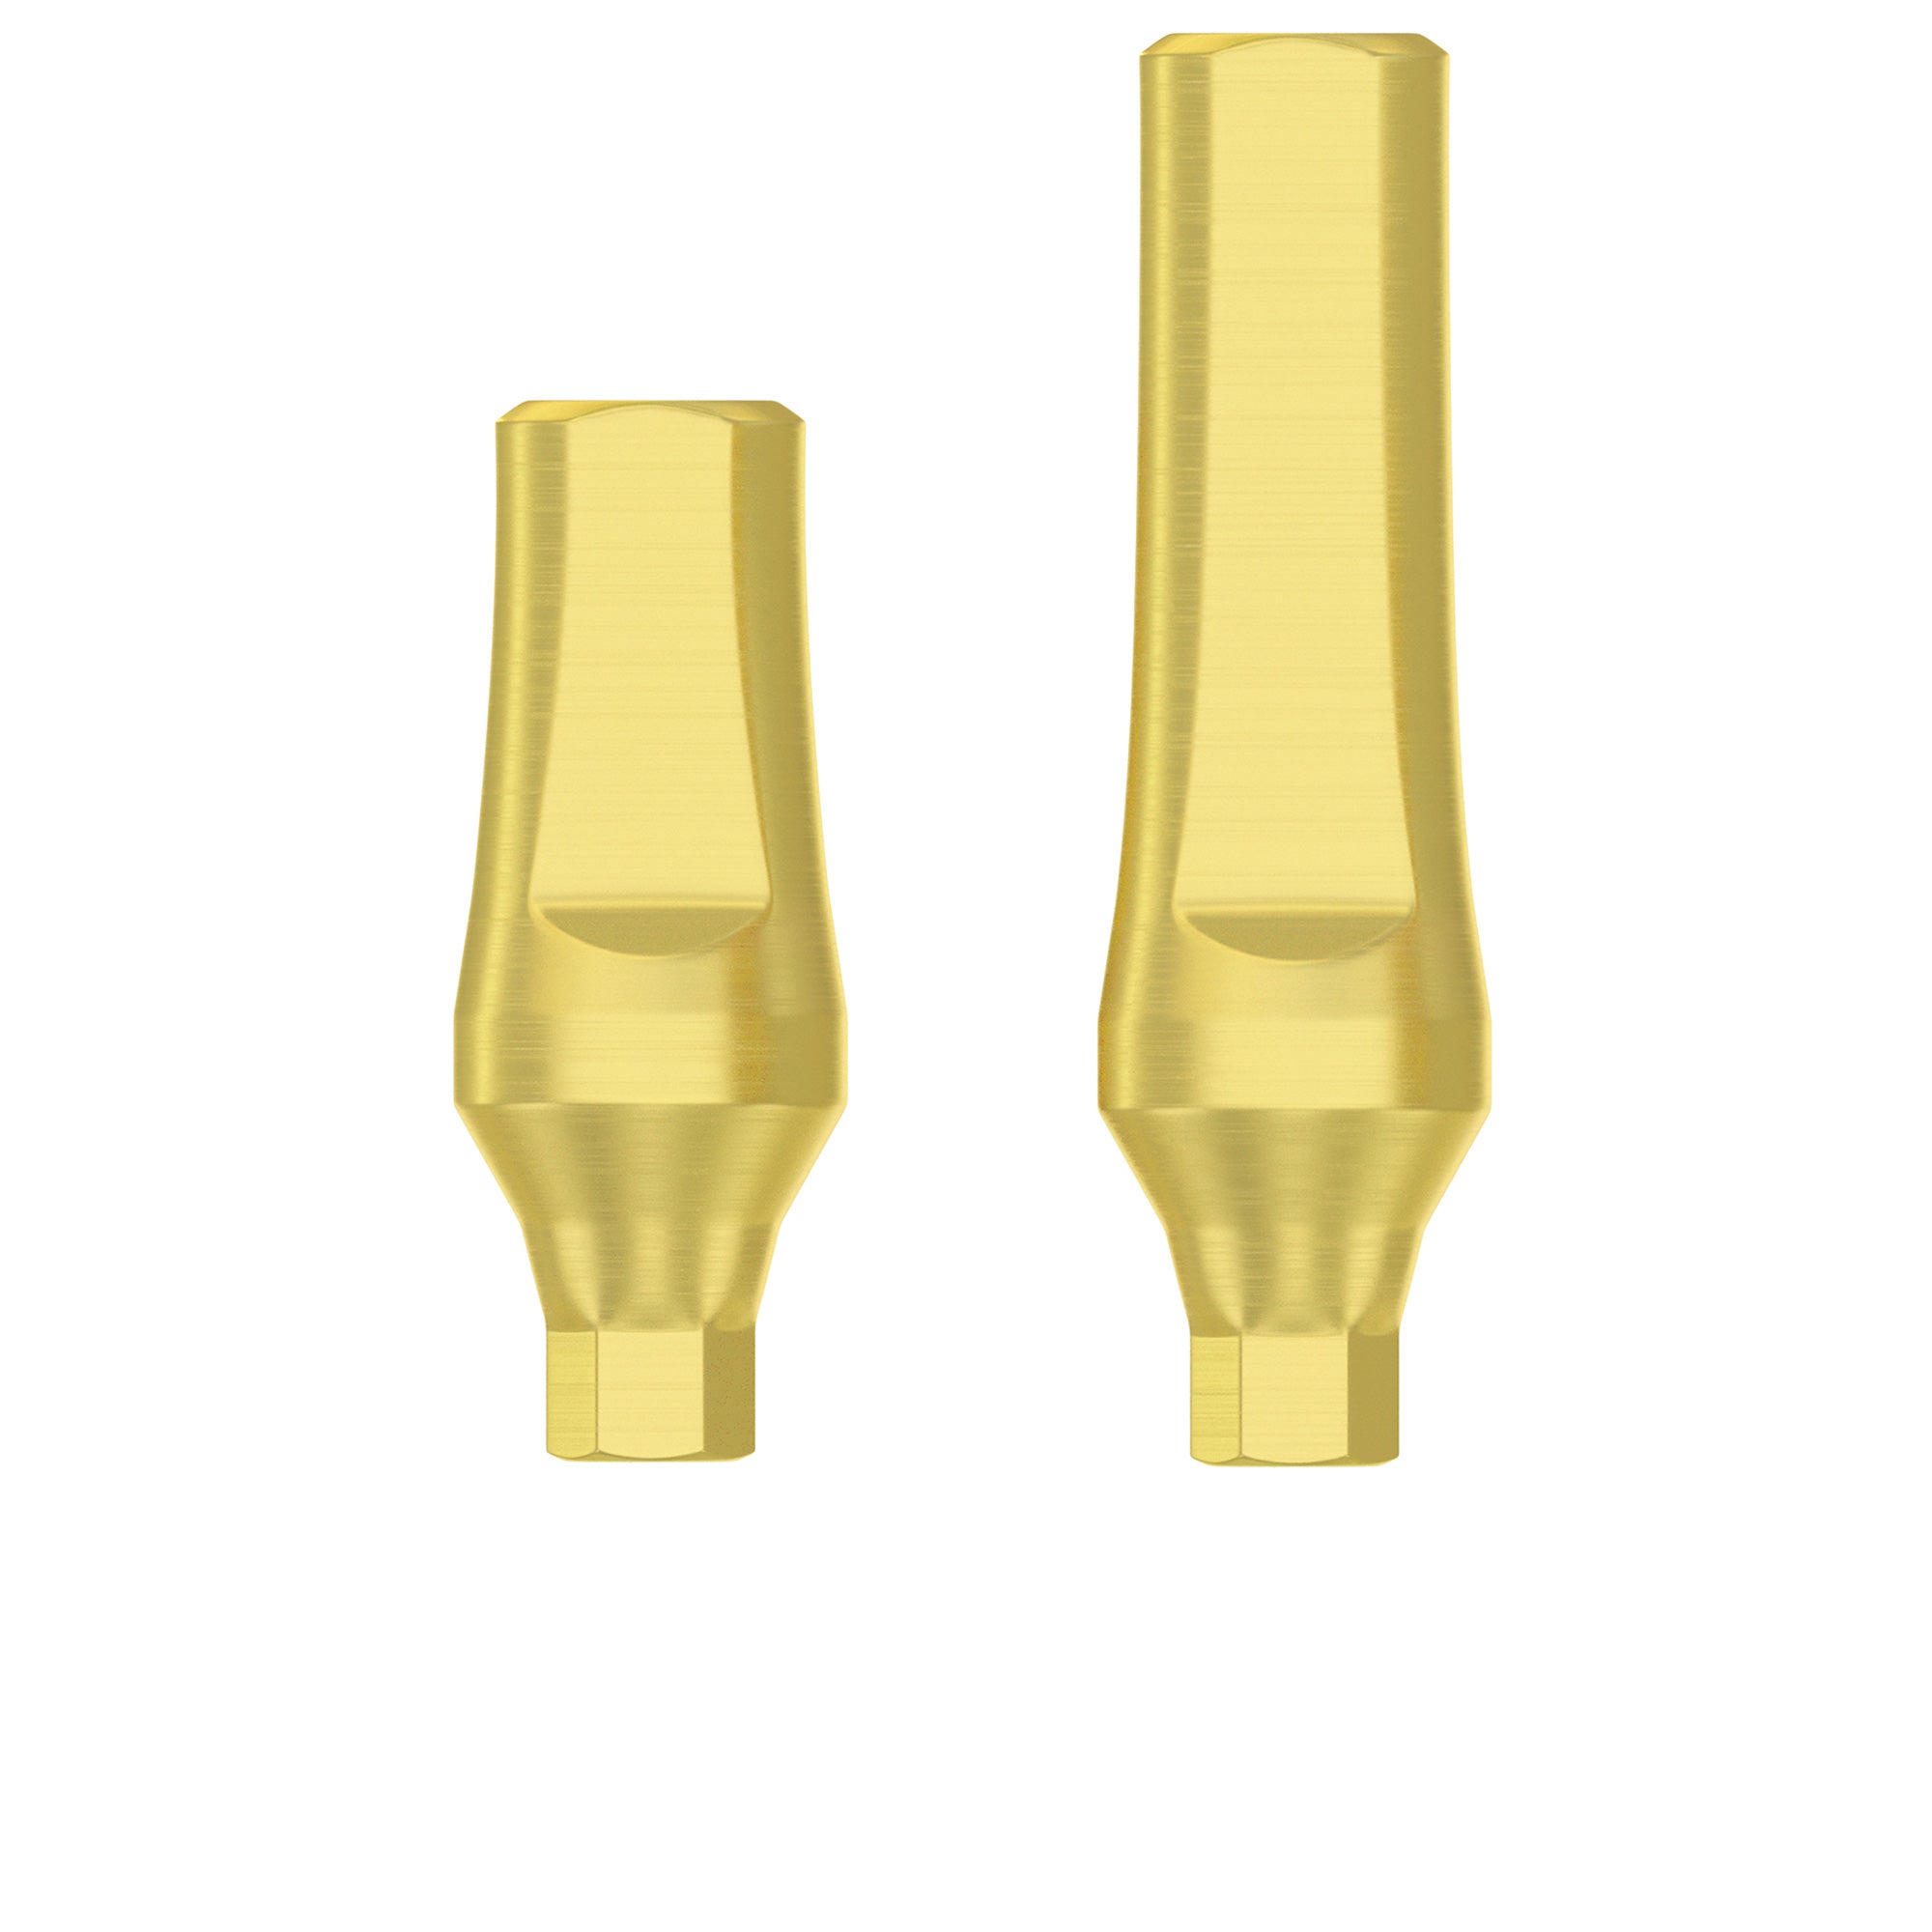 DSI Standart Straight Abutment - Conical Connection RP Ø4.3-5.0mm